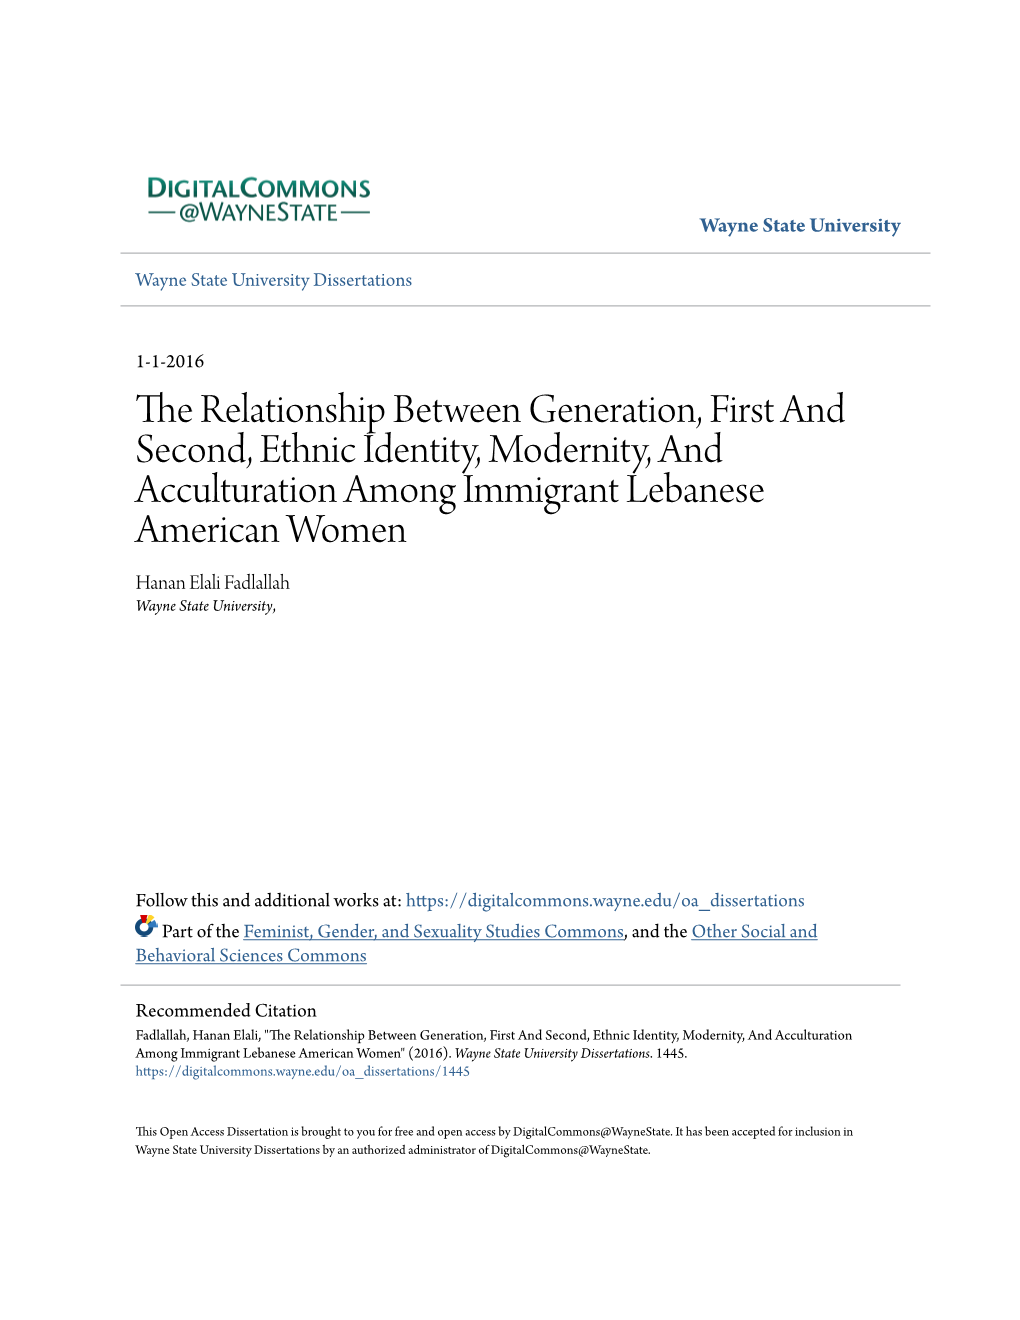 The Relationship Between Generation, First and Second, Ethnic Identity, Modernity, and Acculturation Among Immigrant Lebanese Am